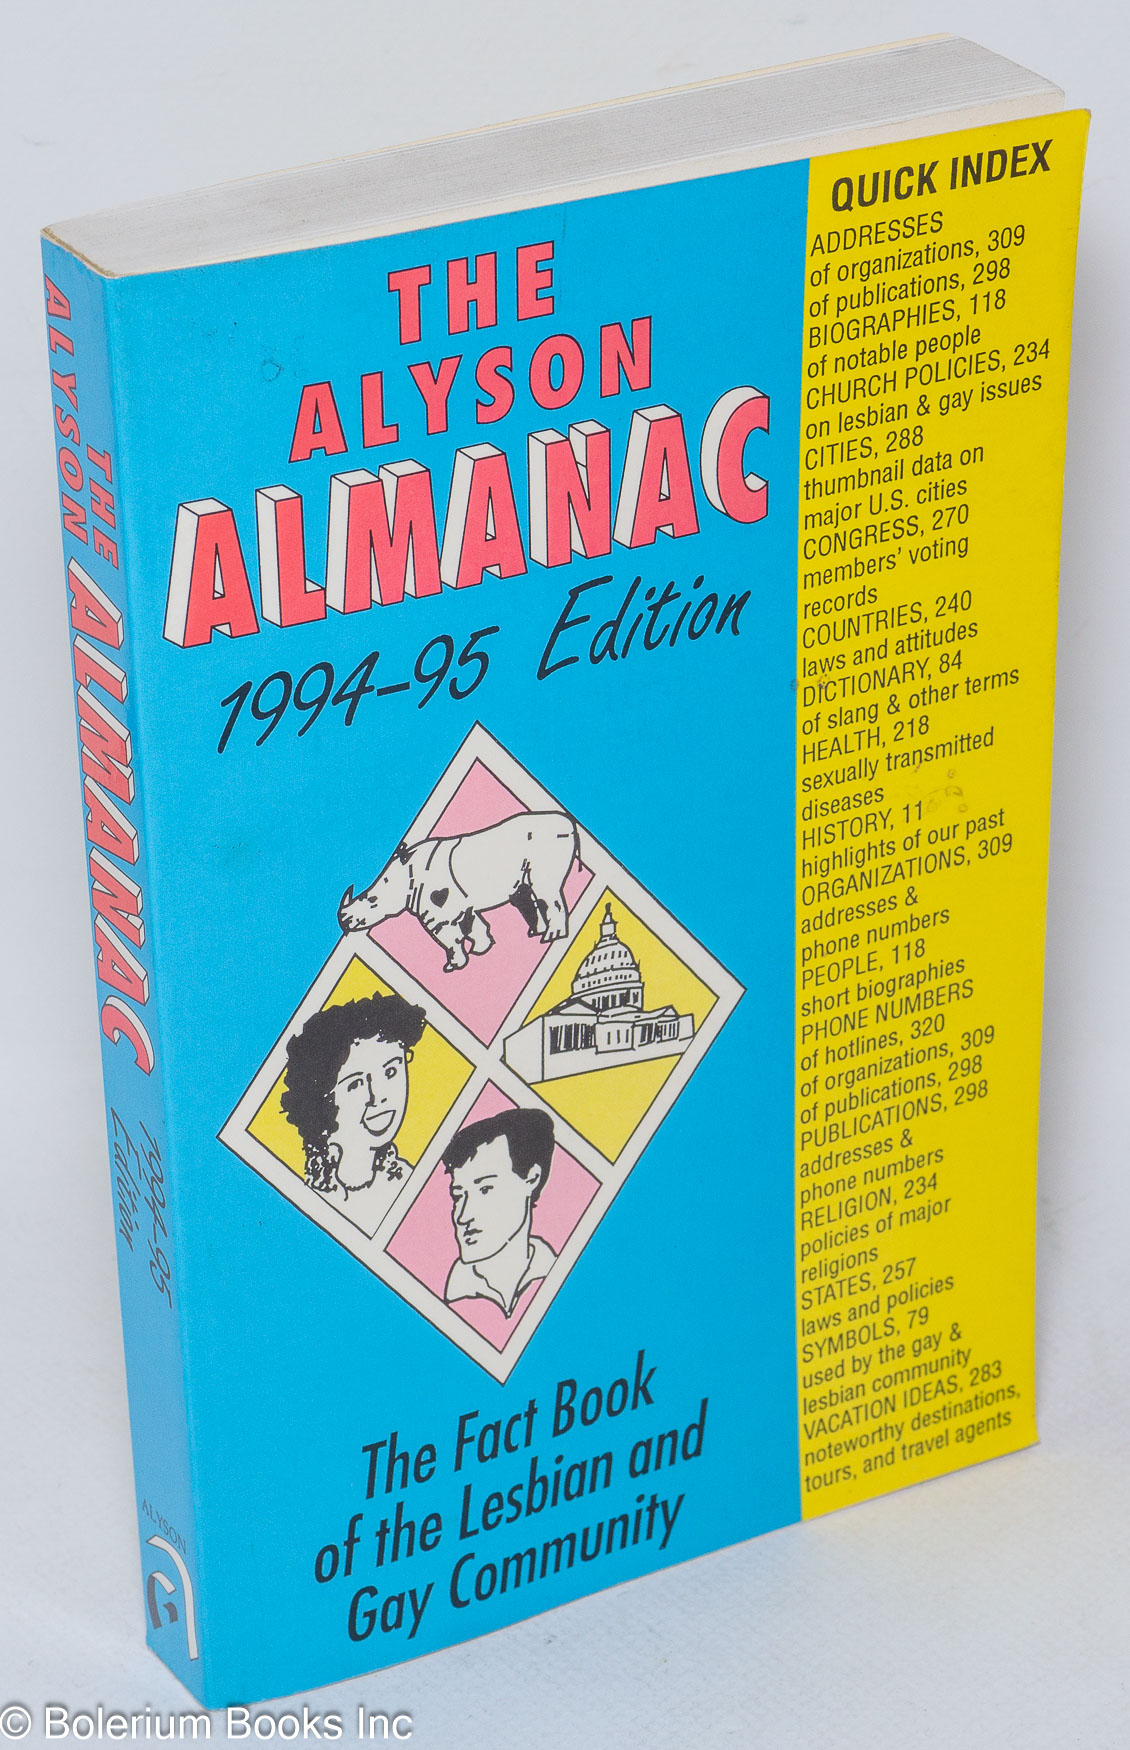 The Alyson almanac; 1994-95 edition, the fact book of the gay and lesbian community